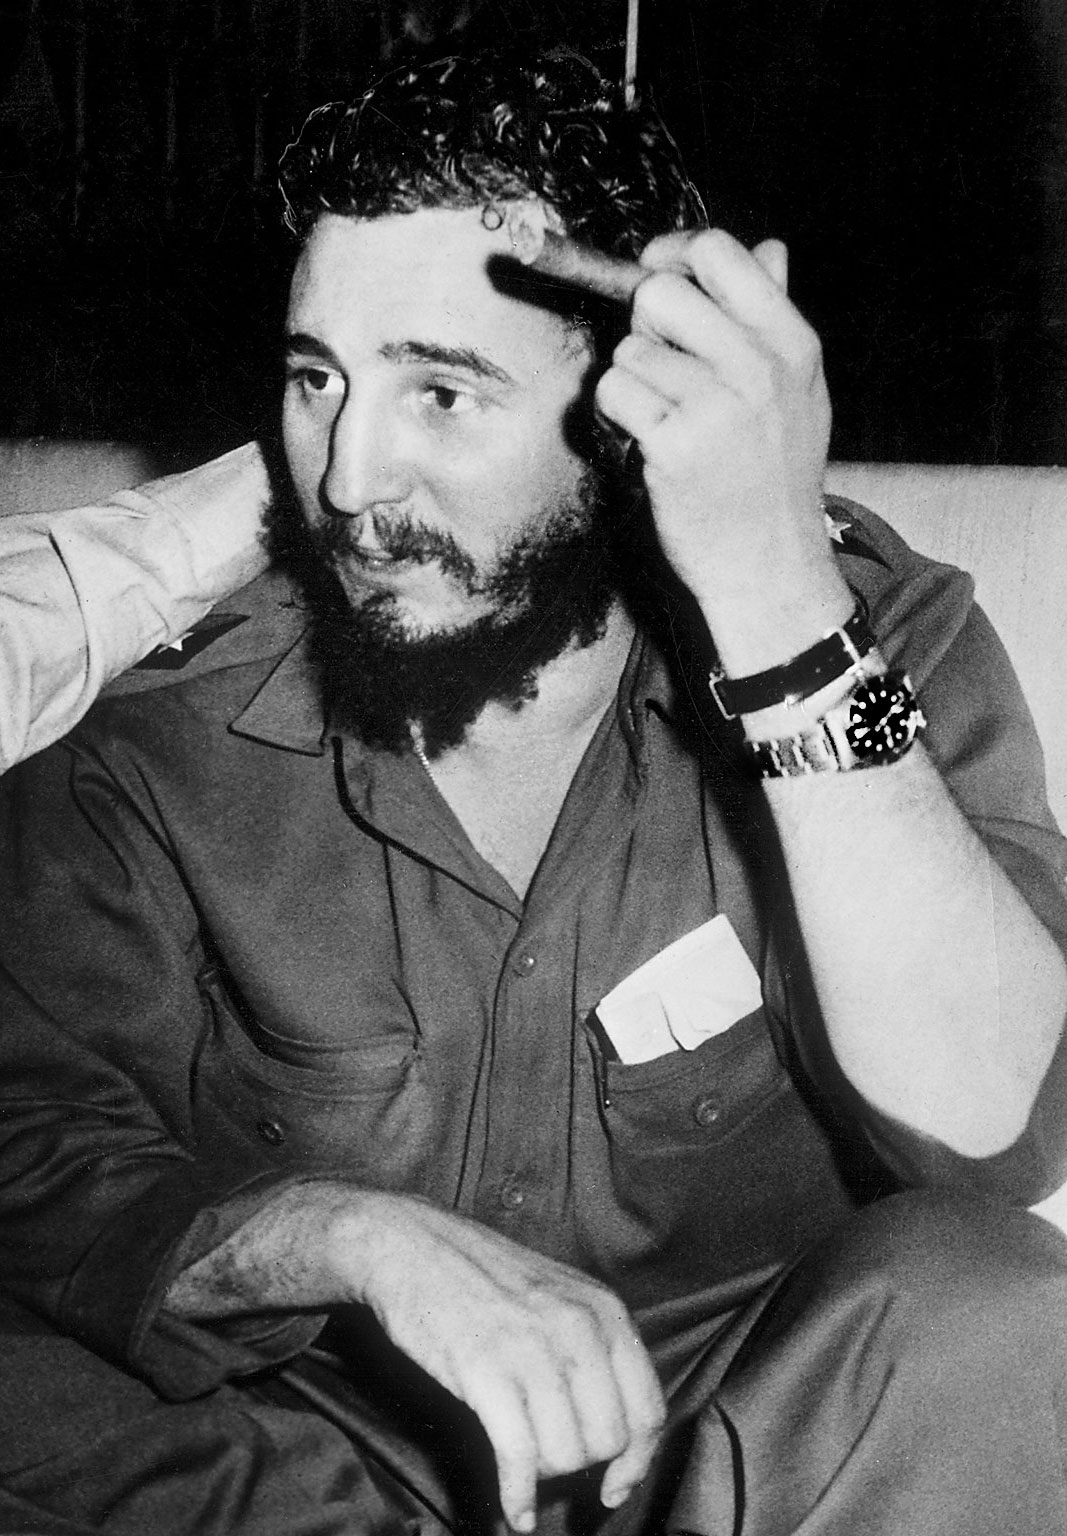 But what happened to Che's Rolex?